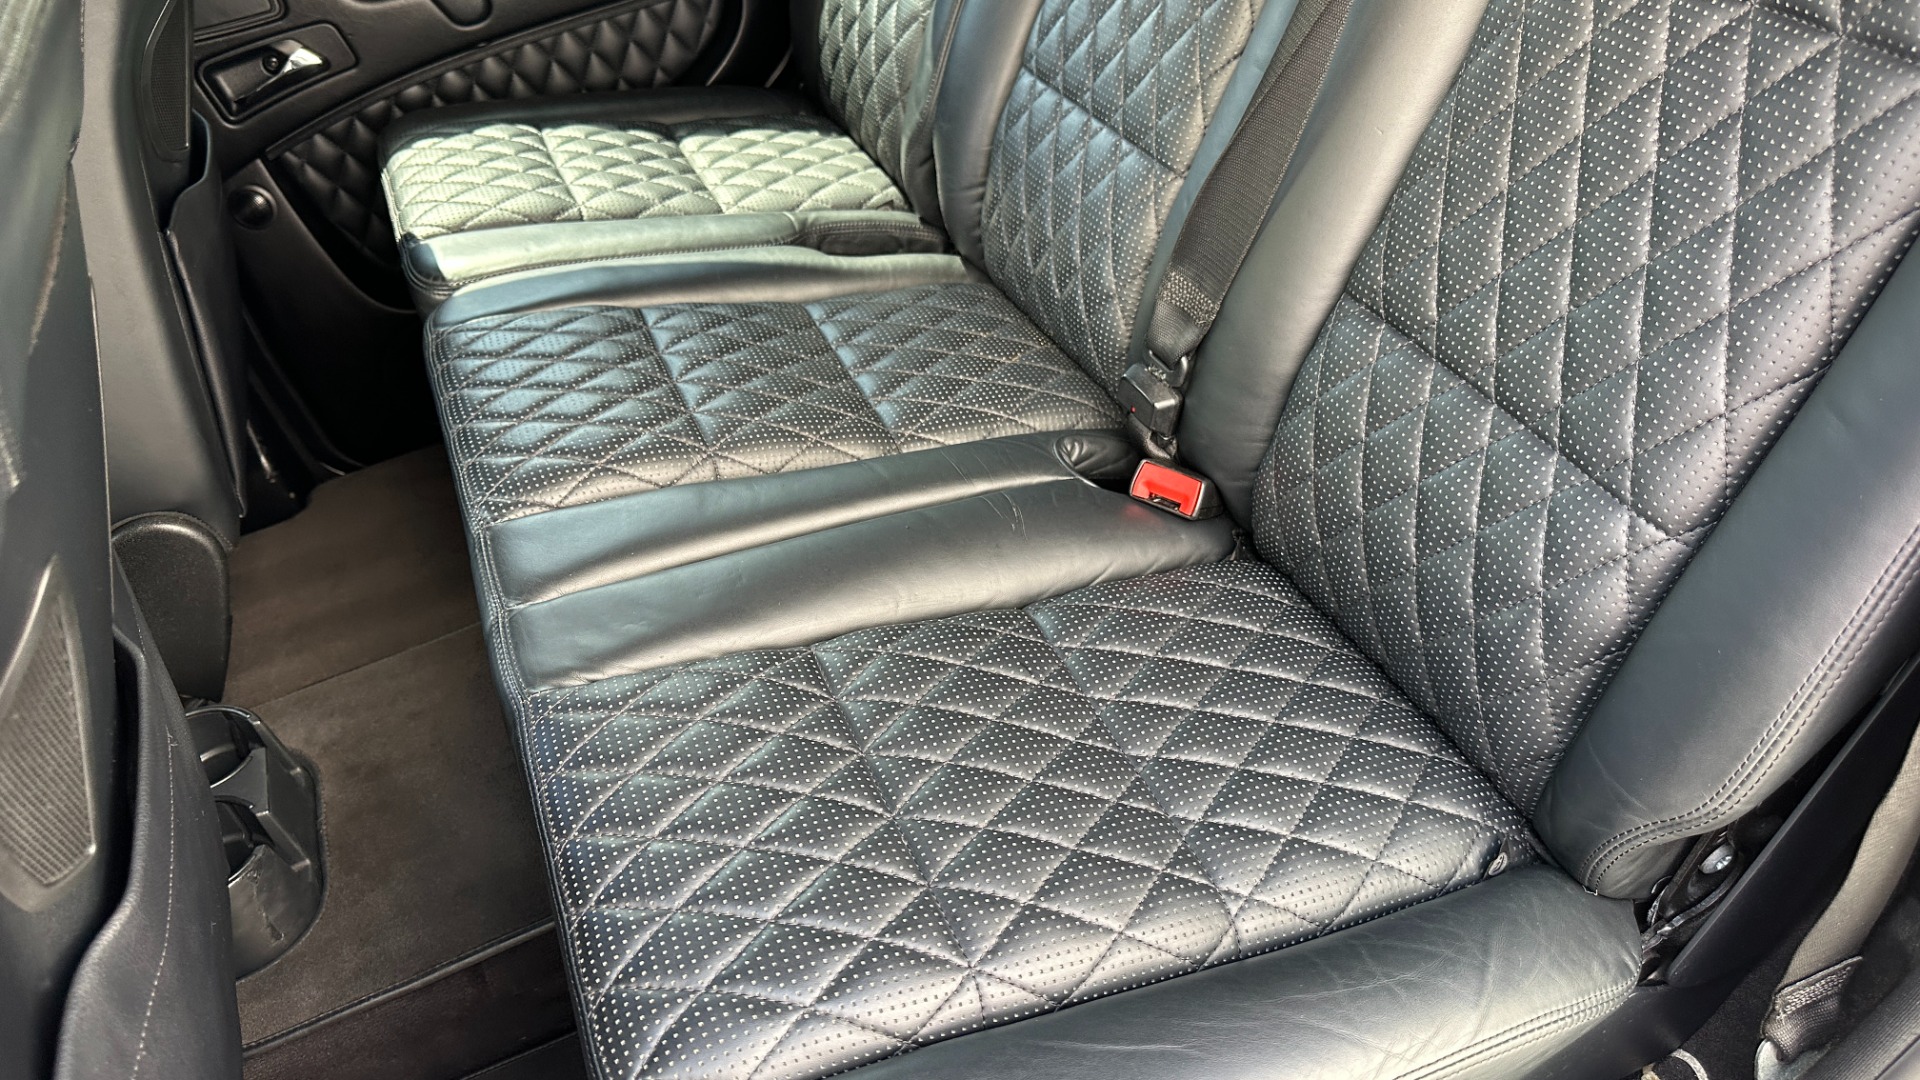 Used 2014 Mercedes-Benz G-Class G 63 AMG / DESIGNO LEATHER / DIAMOND STITCH / SPORTS SEATS / PA6 PKG for sale $67,995 at Formula Imports in Charlotte NC 28227 25